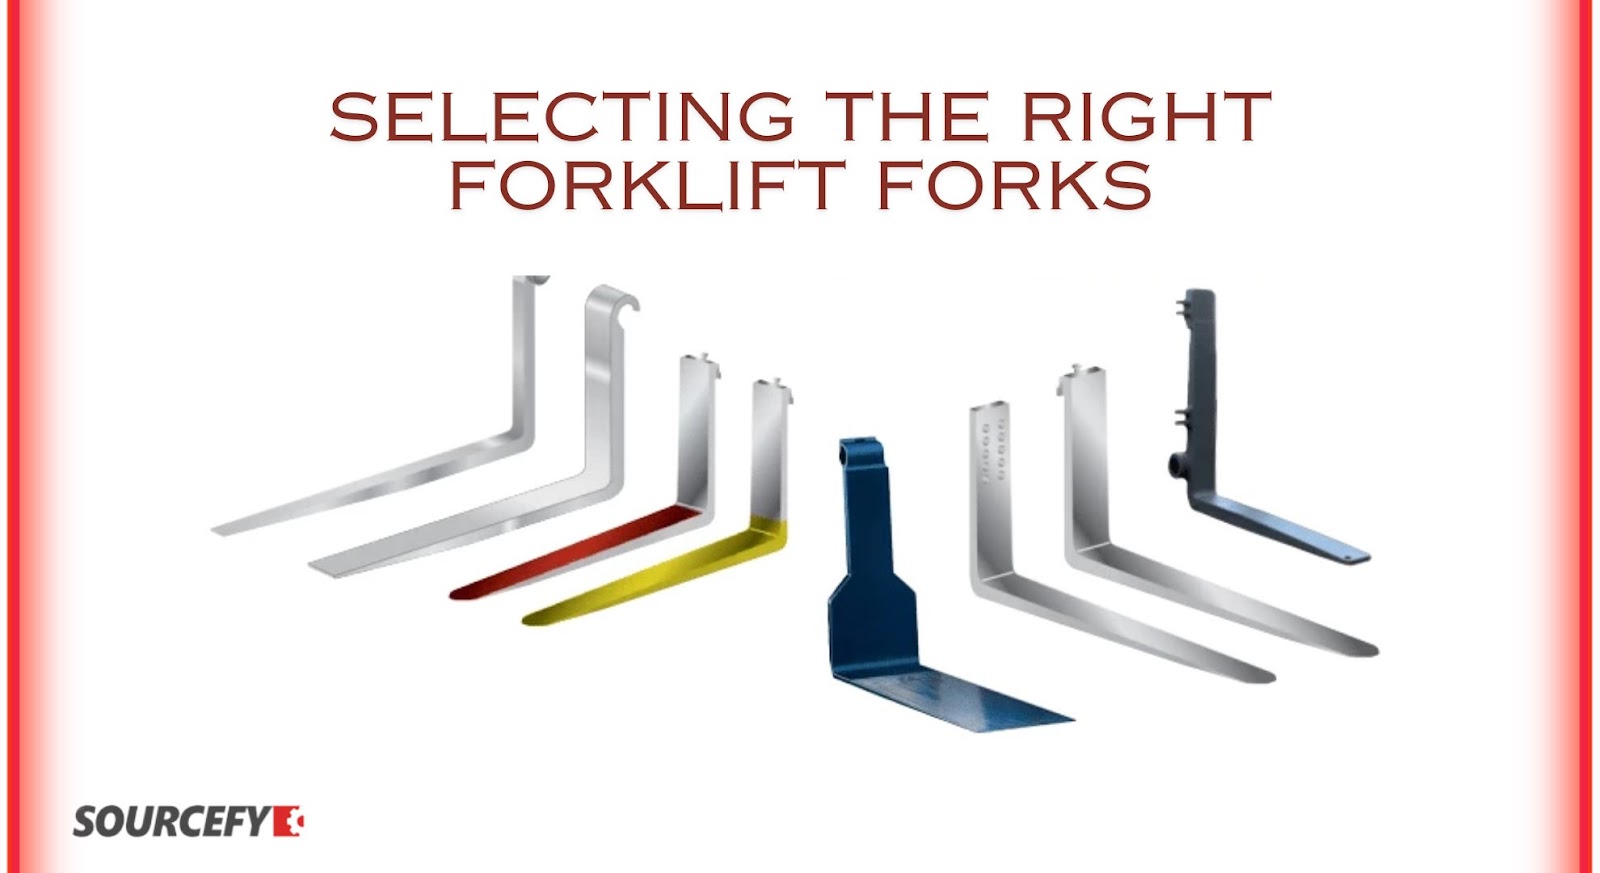 Selecting the Right Forklift Forks